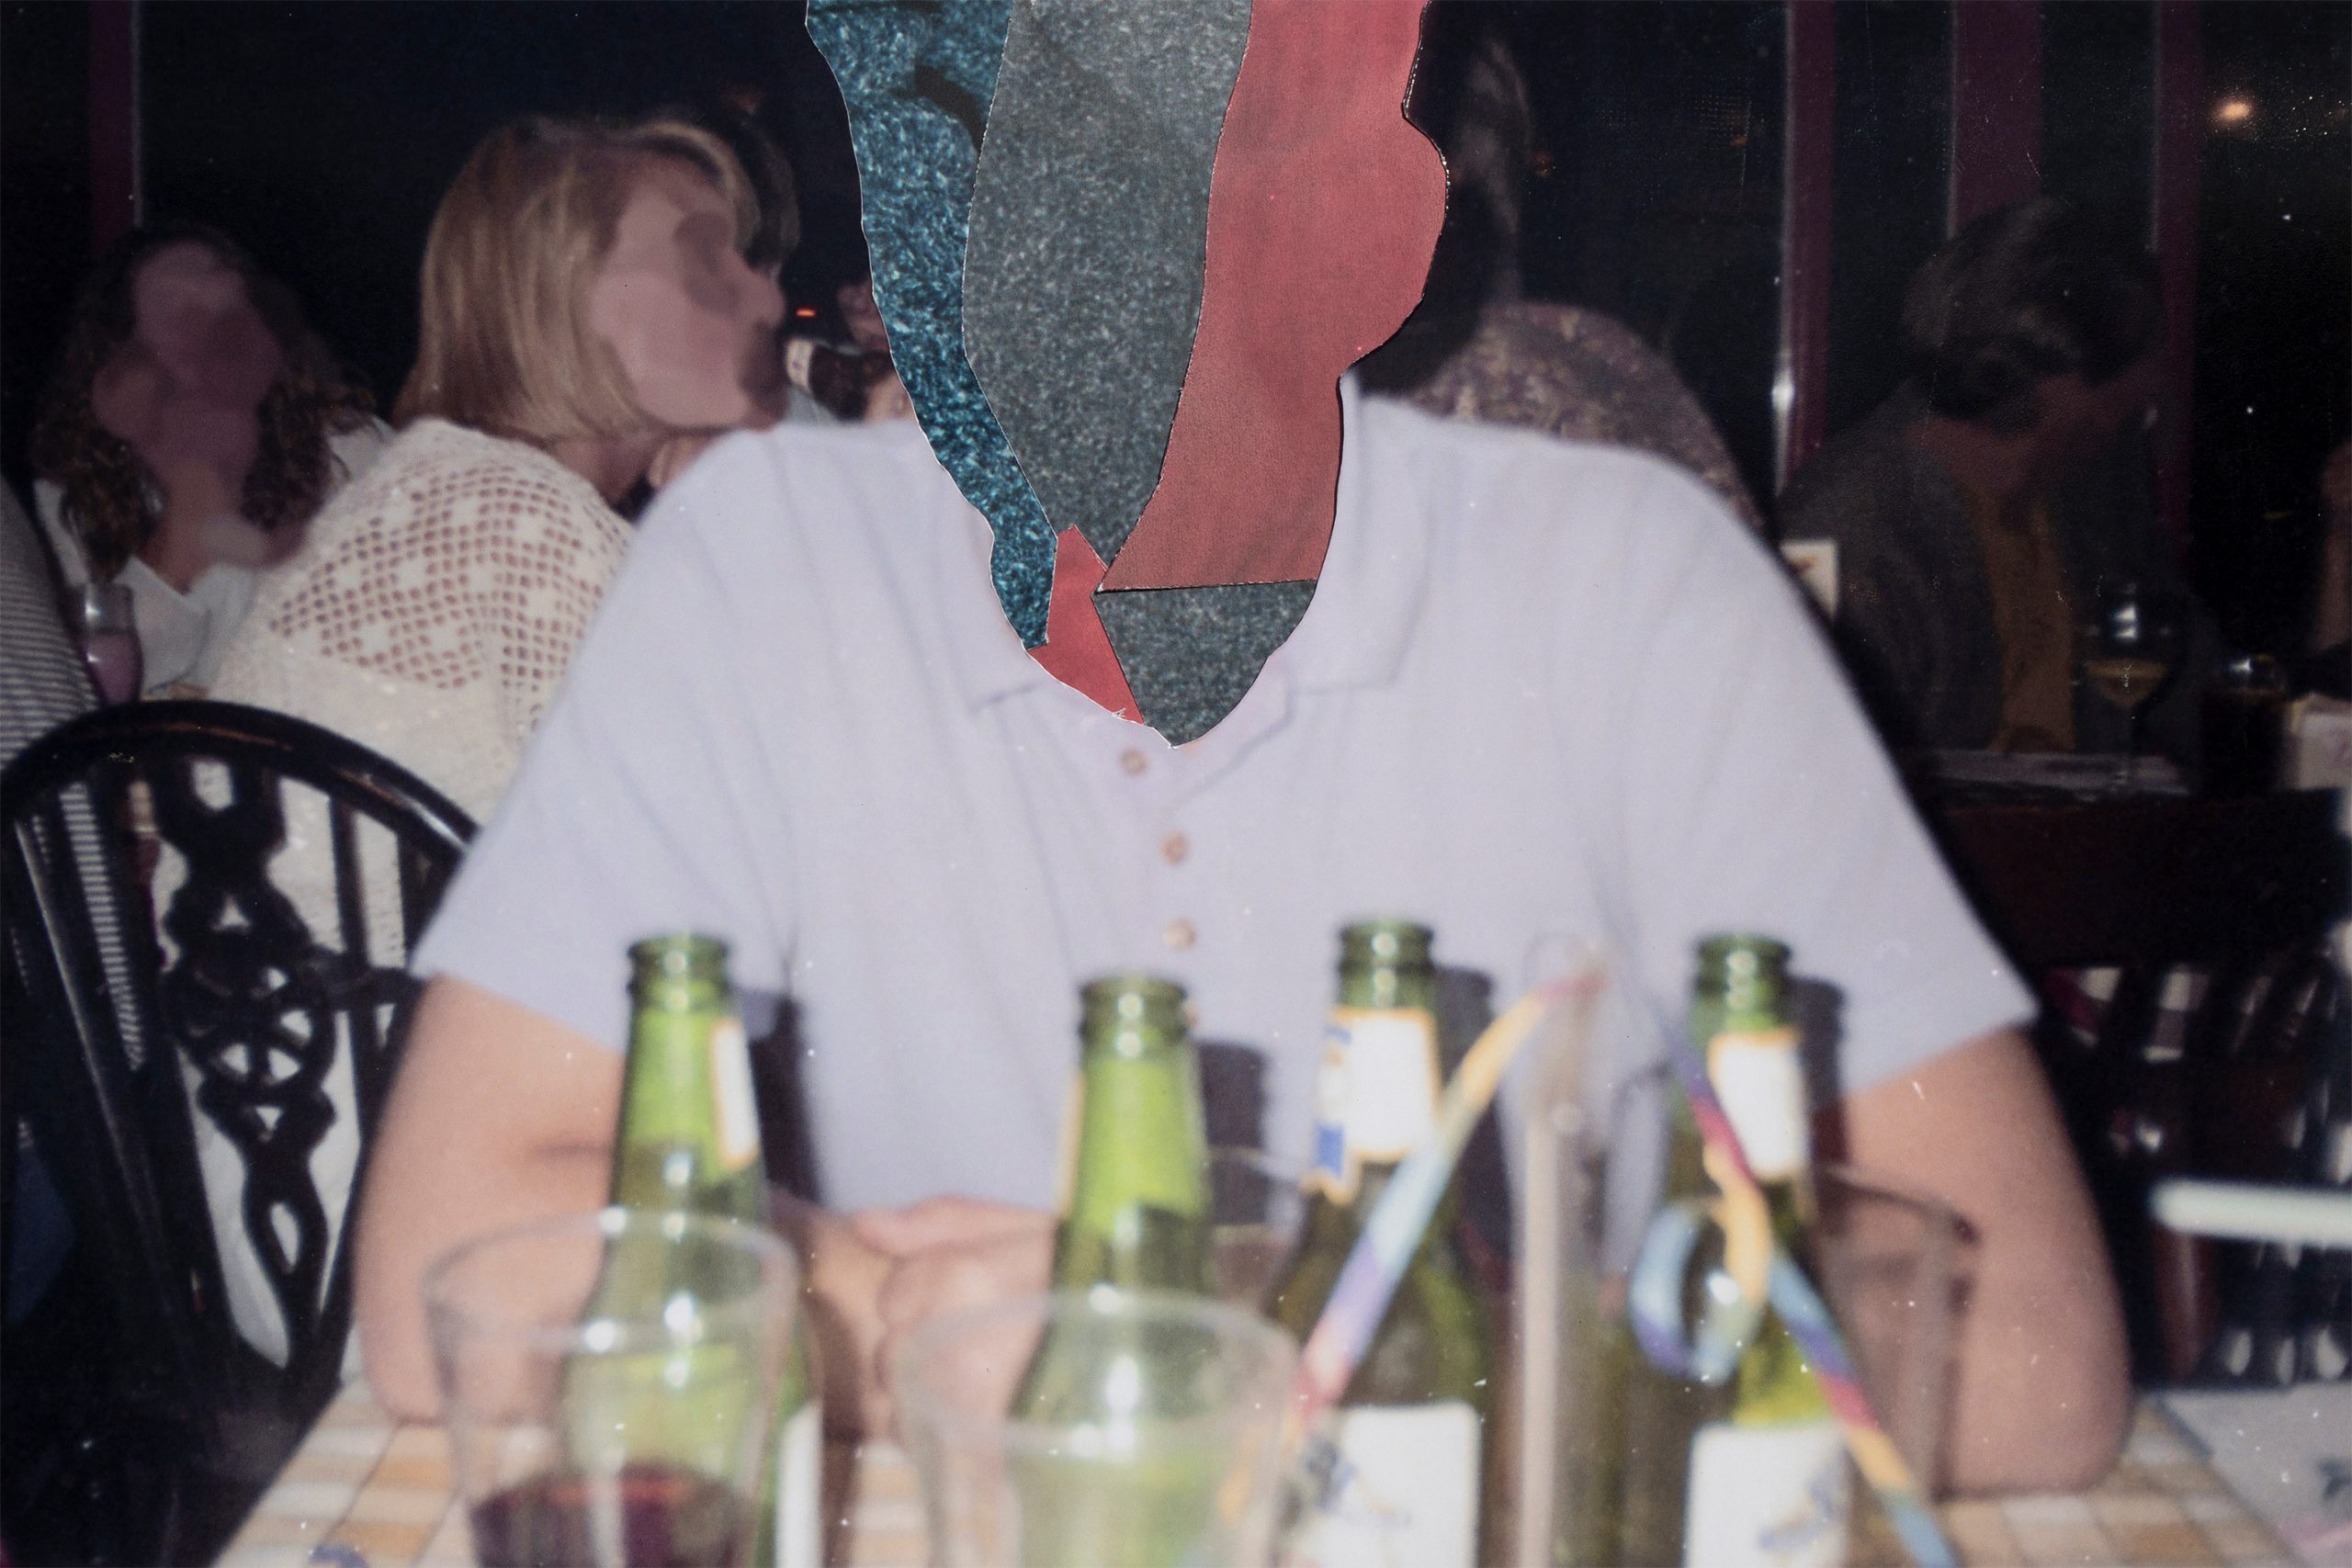 A photograph of a person sat at a table covered in beer bottles and glasses. Their face has been obscured with a collage of various colours and shapes.